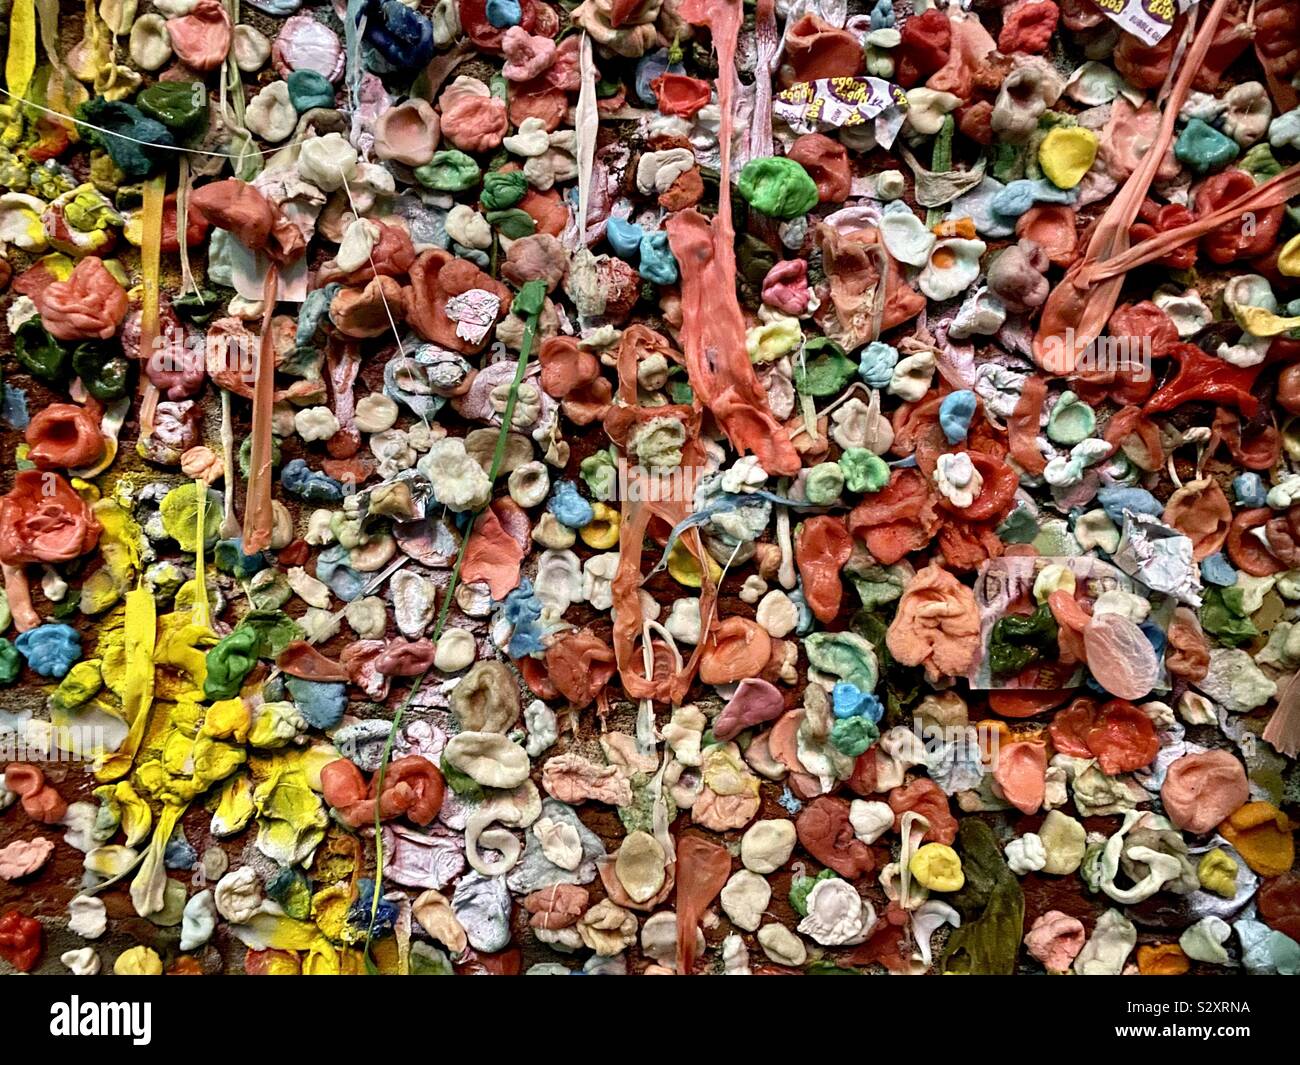 Close-up of the iconic Seattle gum wall in Post Alley, Pike Place Market, Seattle, Washington, USA Stock Photo